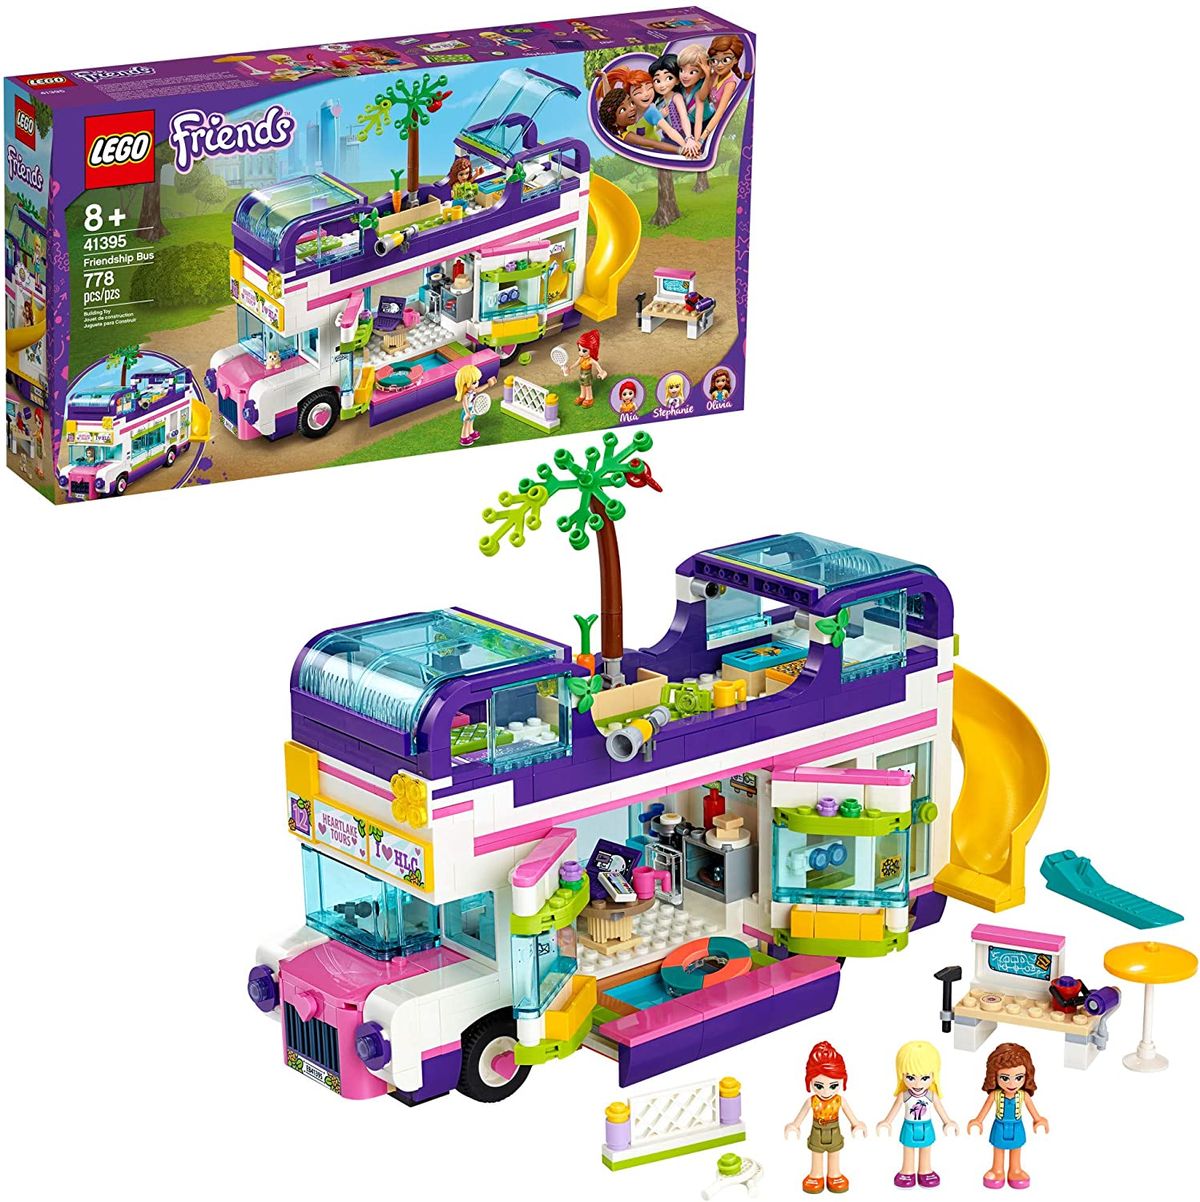 Best Prime Day Toy Deals 2020 The Best Lego And Stem Sets Marvel And Funko Figures And More Techradar - amazon com roblox ultimate collector s set series 1 toys games